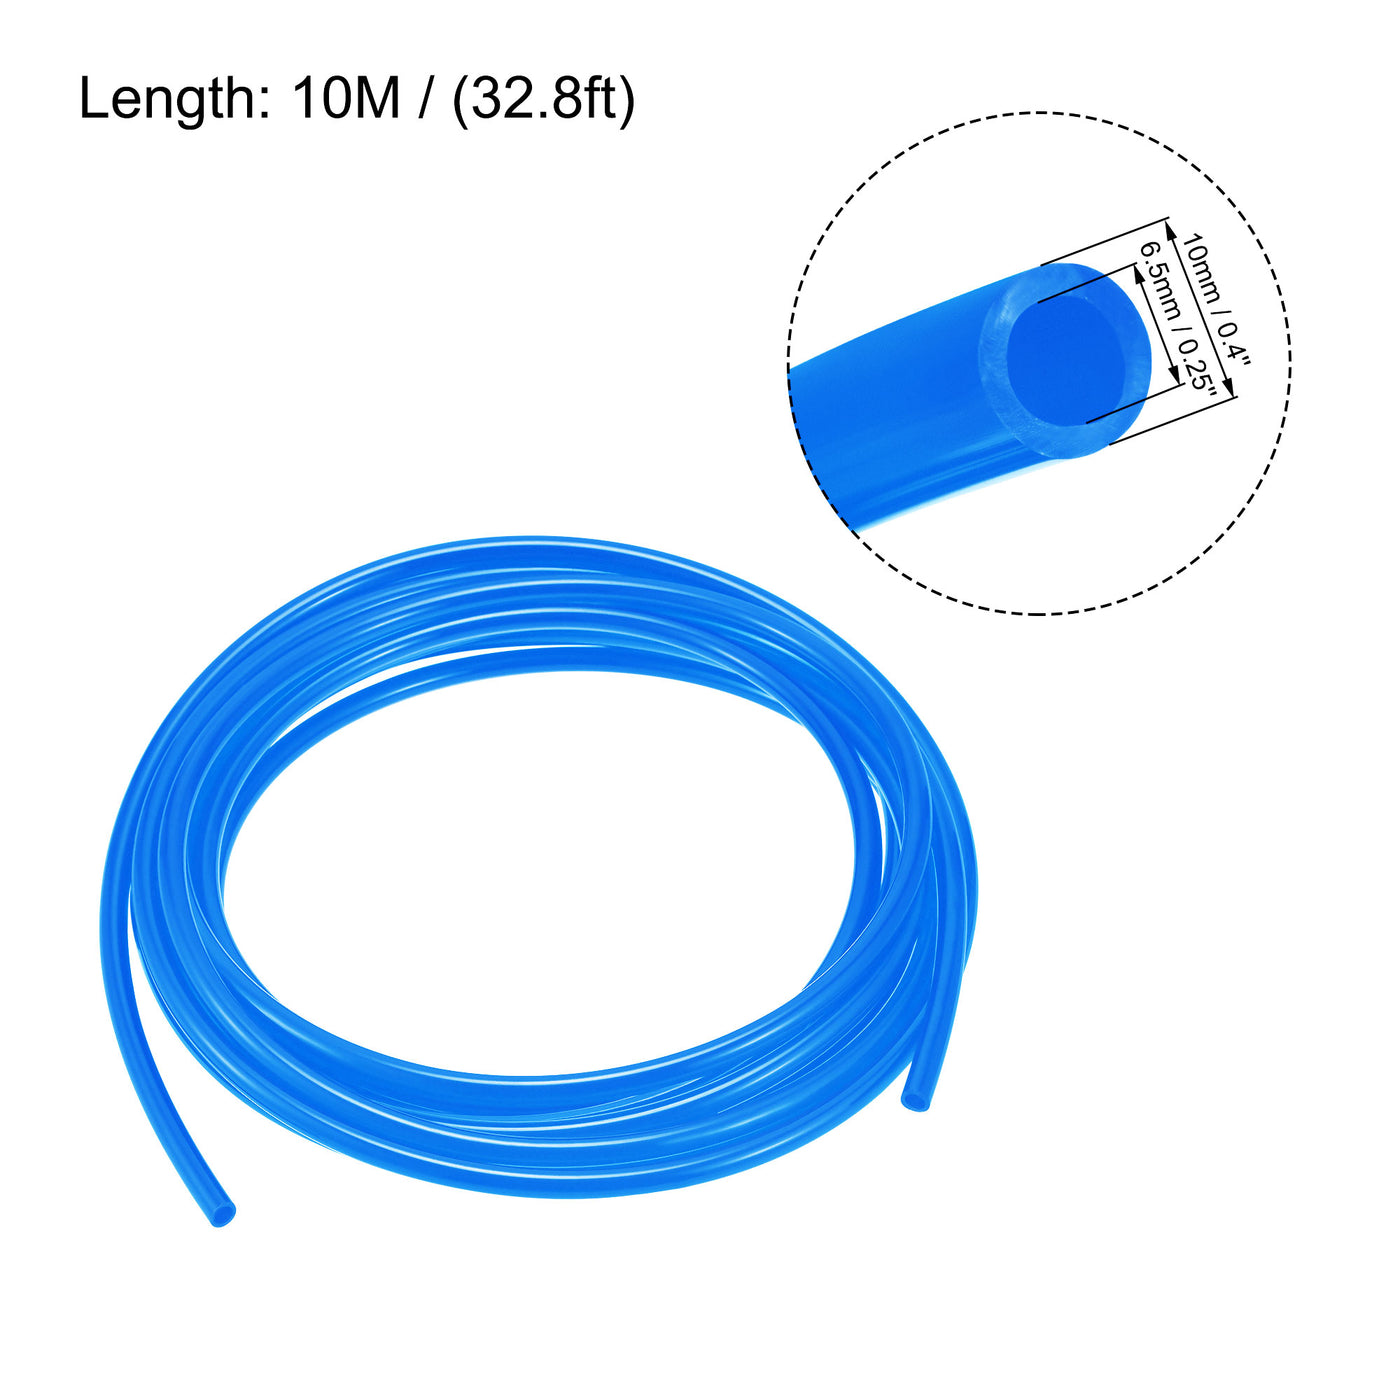 uxcell Uxcell Pneumatic Air Hose Tubing PU Air Compressor Tube 6.5mm/0.25''ID x 10mm/0.4''OD x 10m/32.8Ft Polyurethane Pipe Blue with 7 Type Connect Fittings